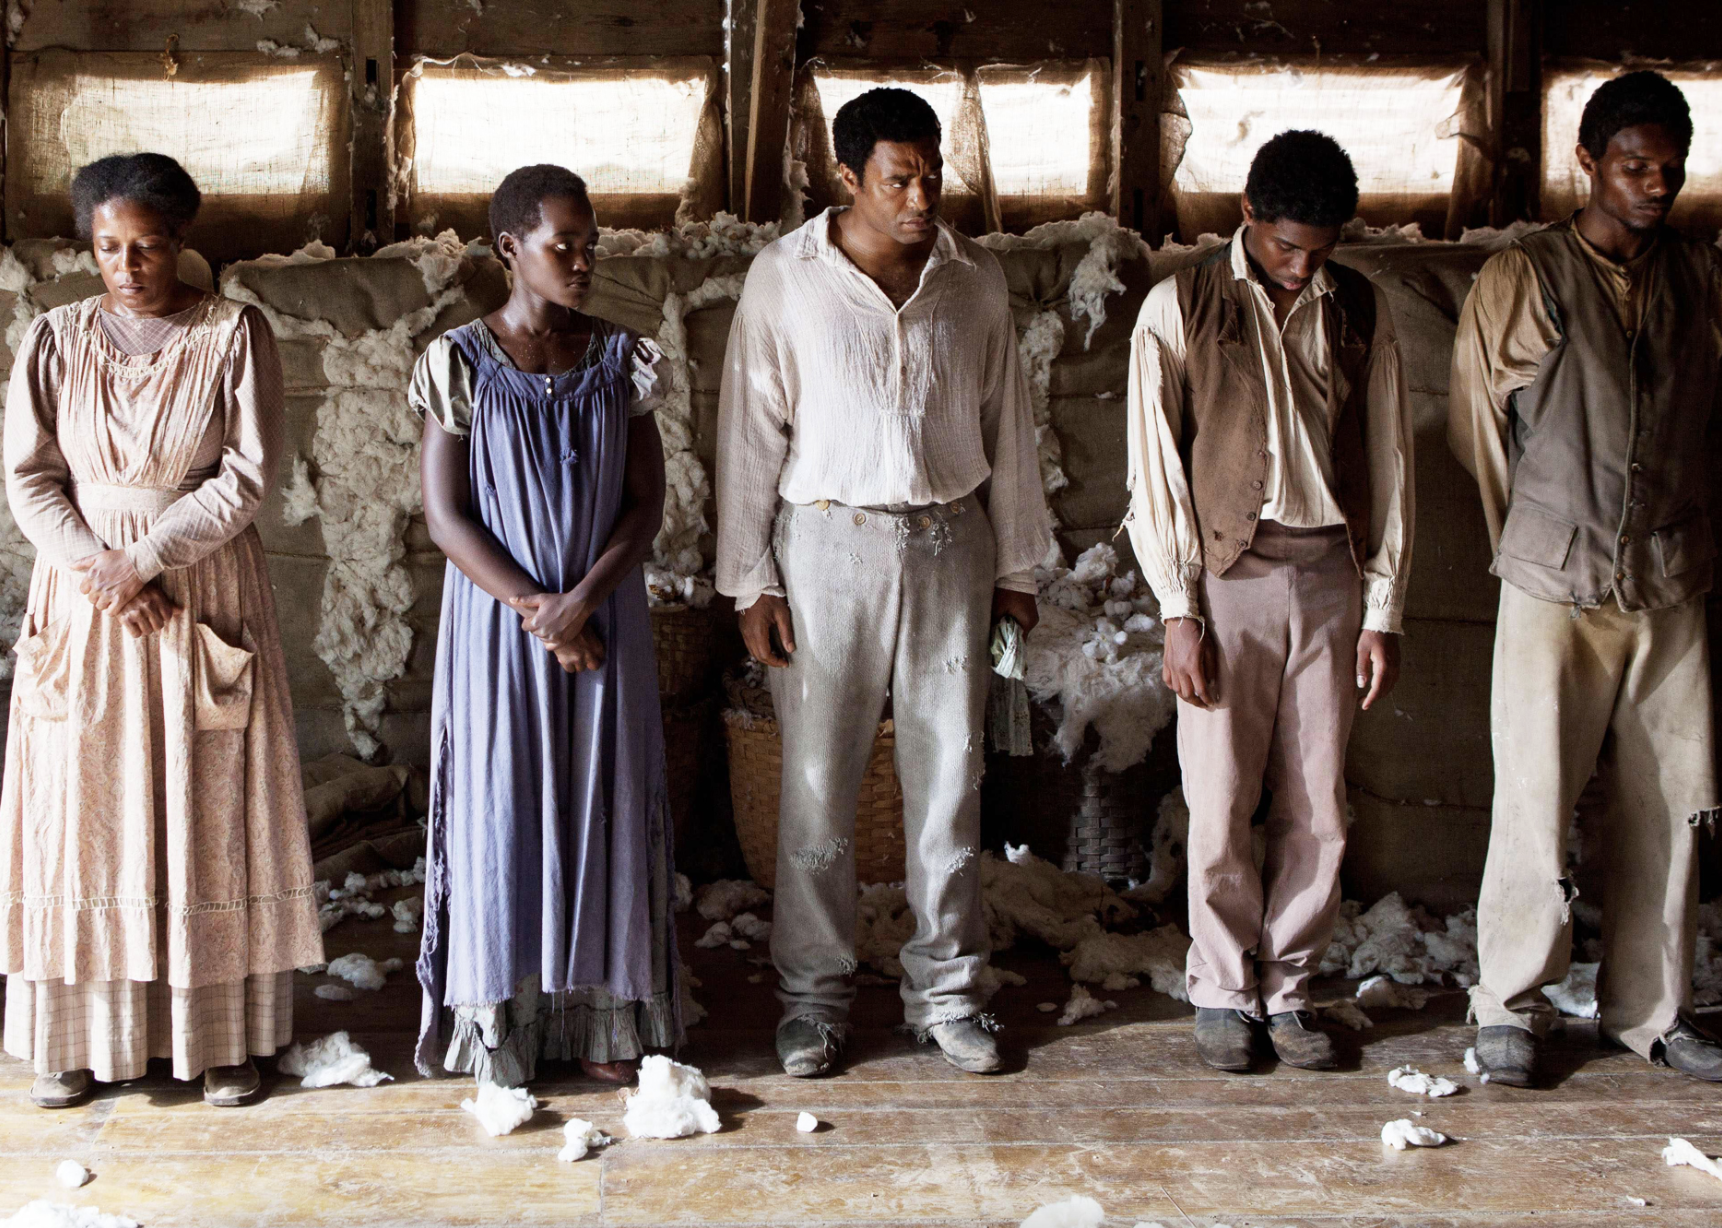 Chiwetel Ejiofor and Lupita Nyong'o in "12 Years a Slave"